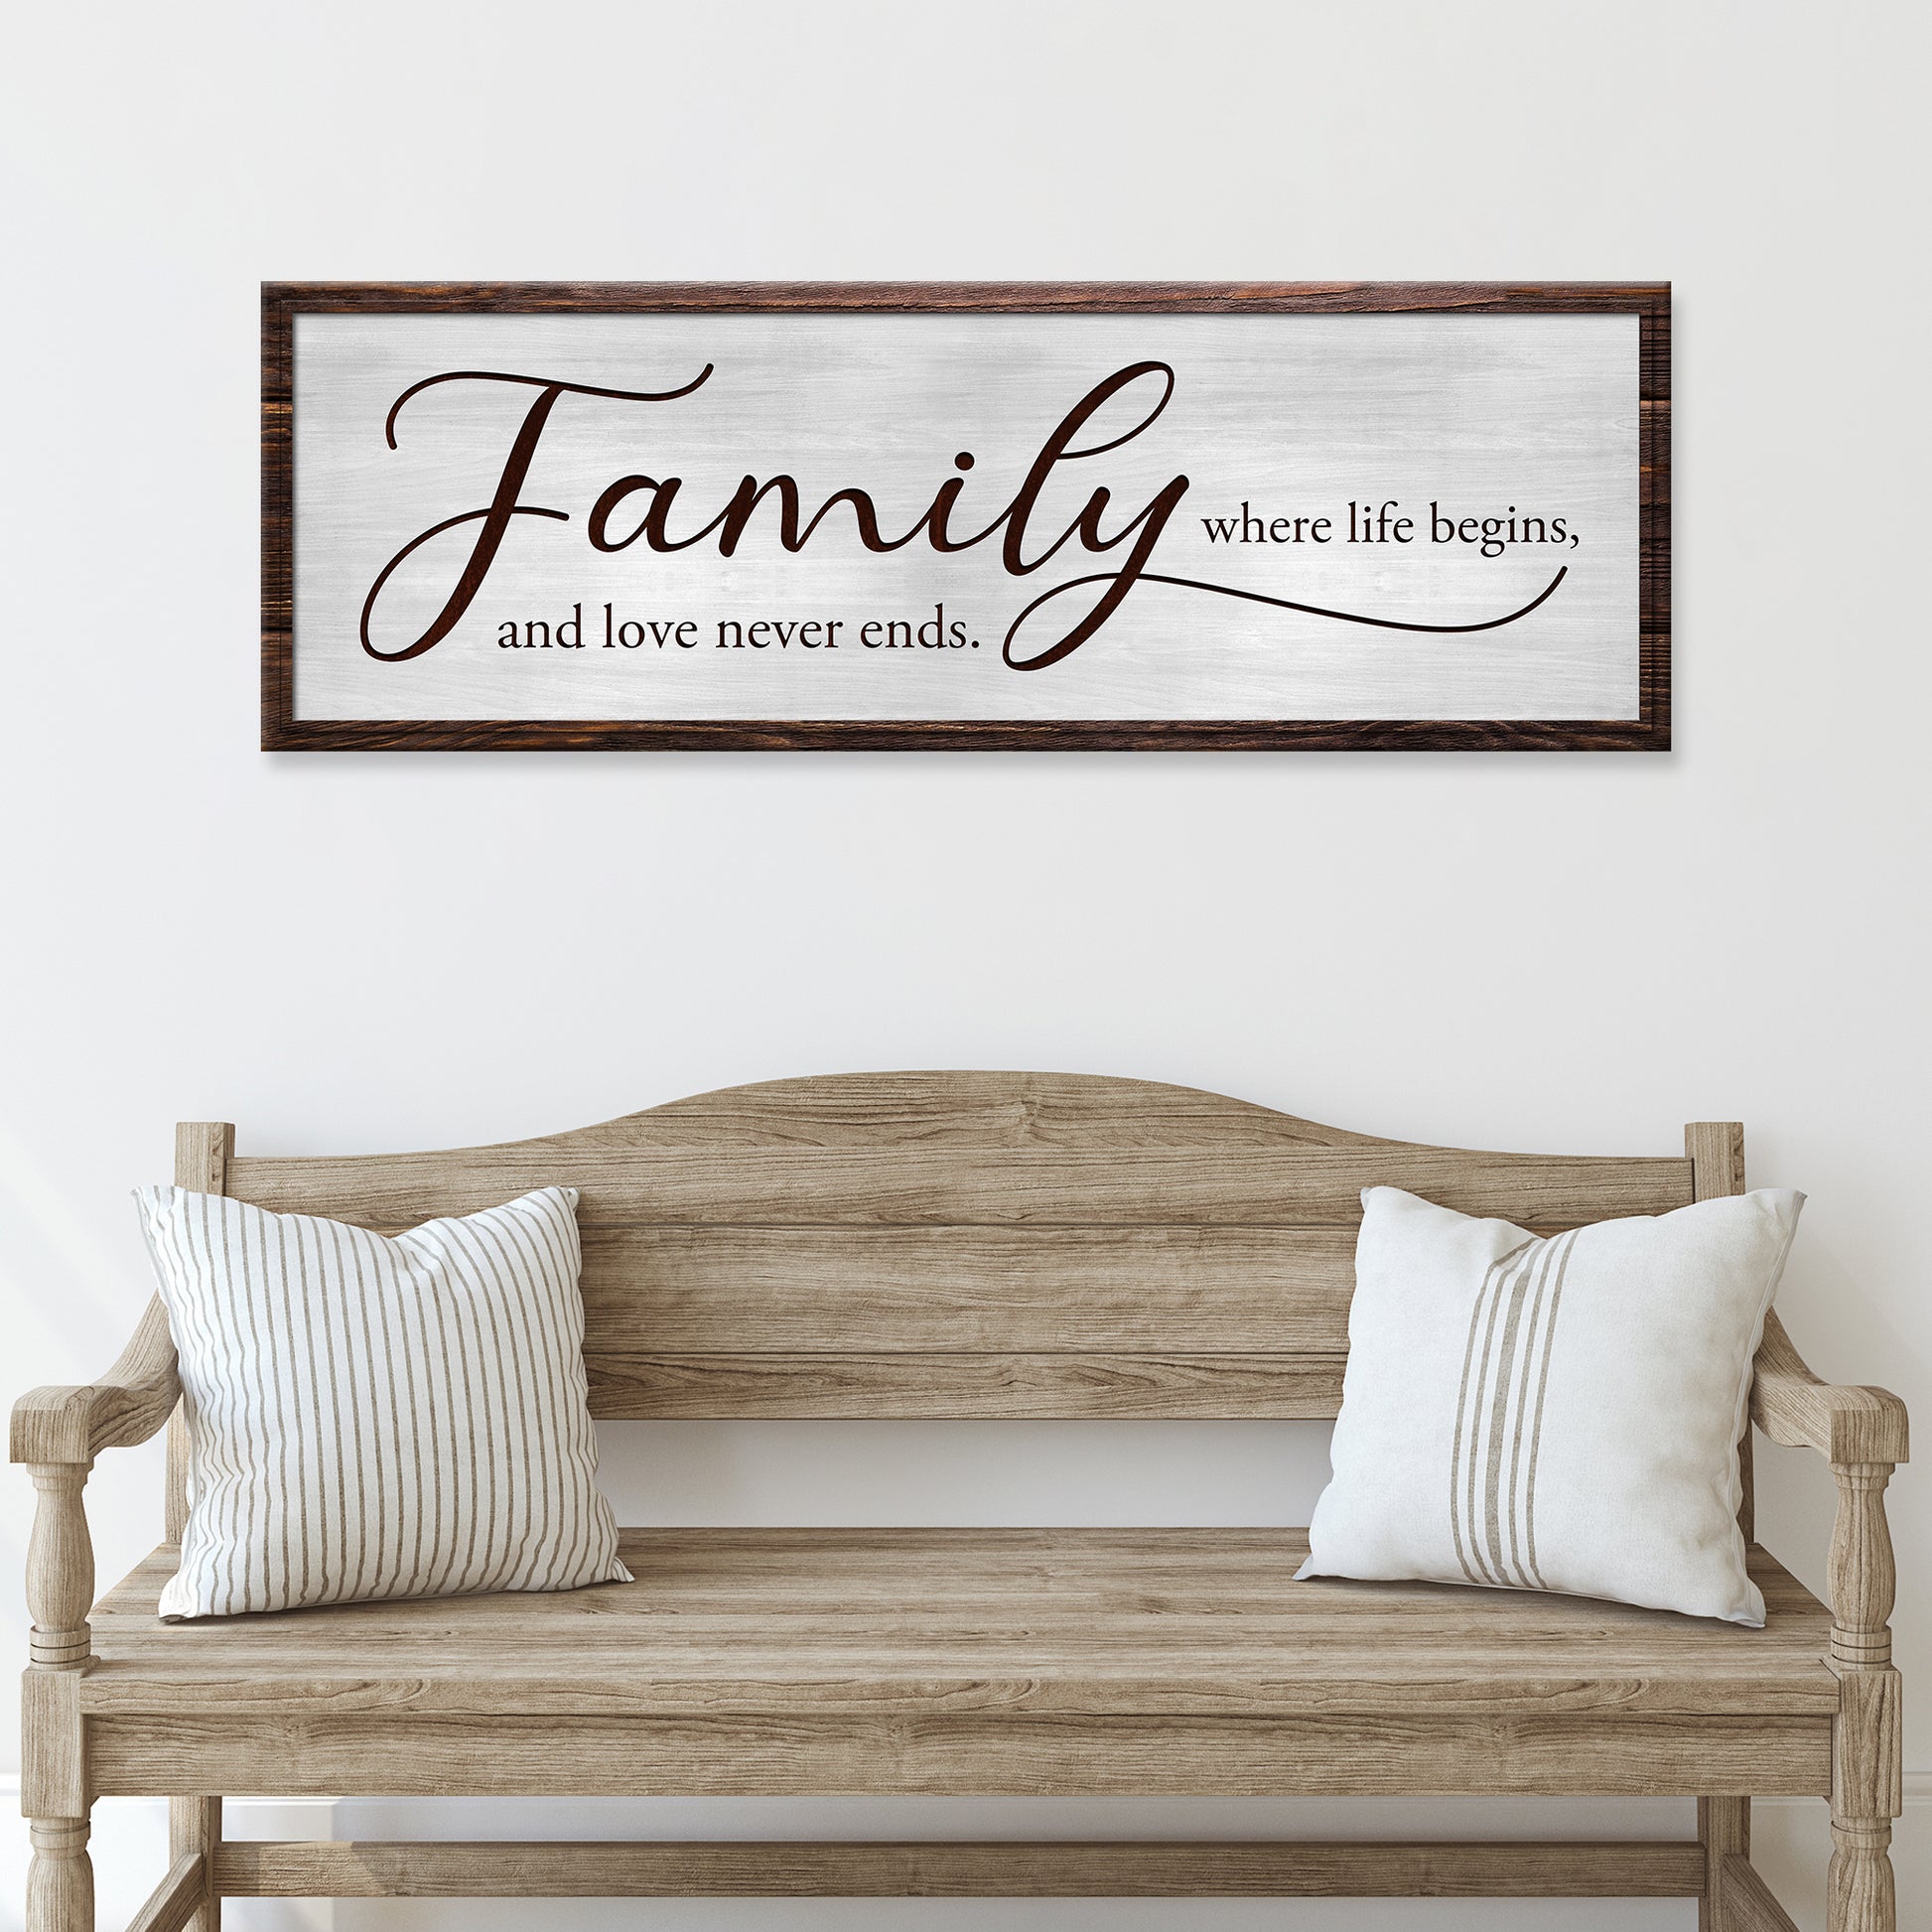 Family Where Life Begins Sign - Image by Tailored Canvases